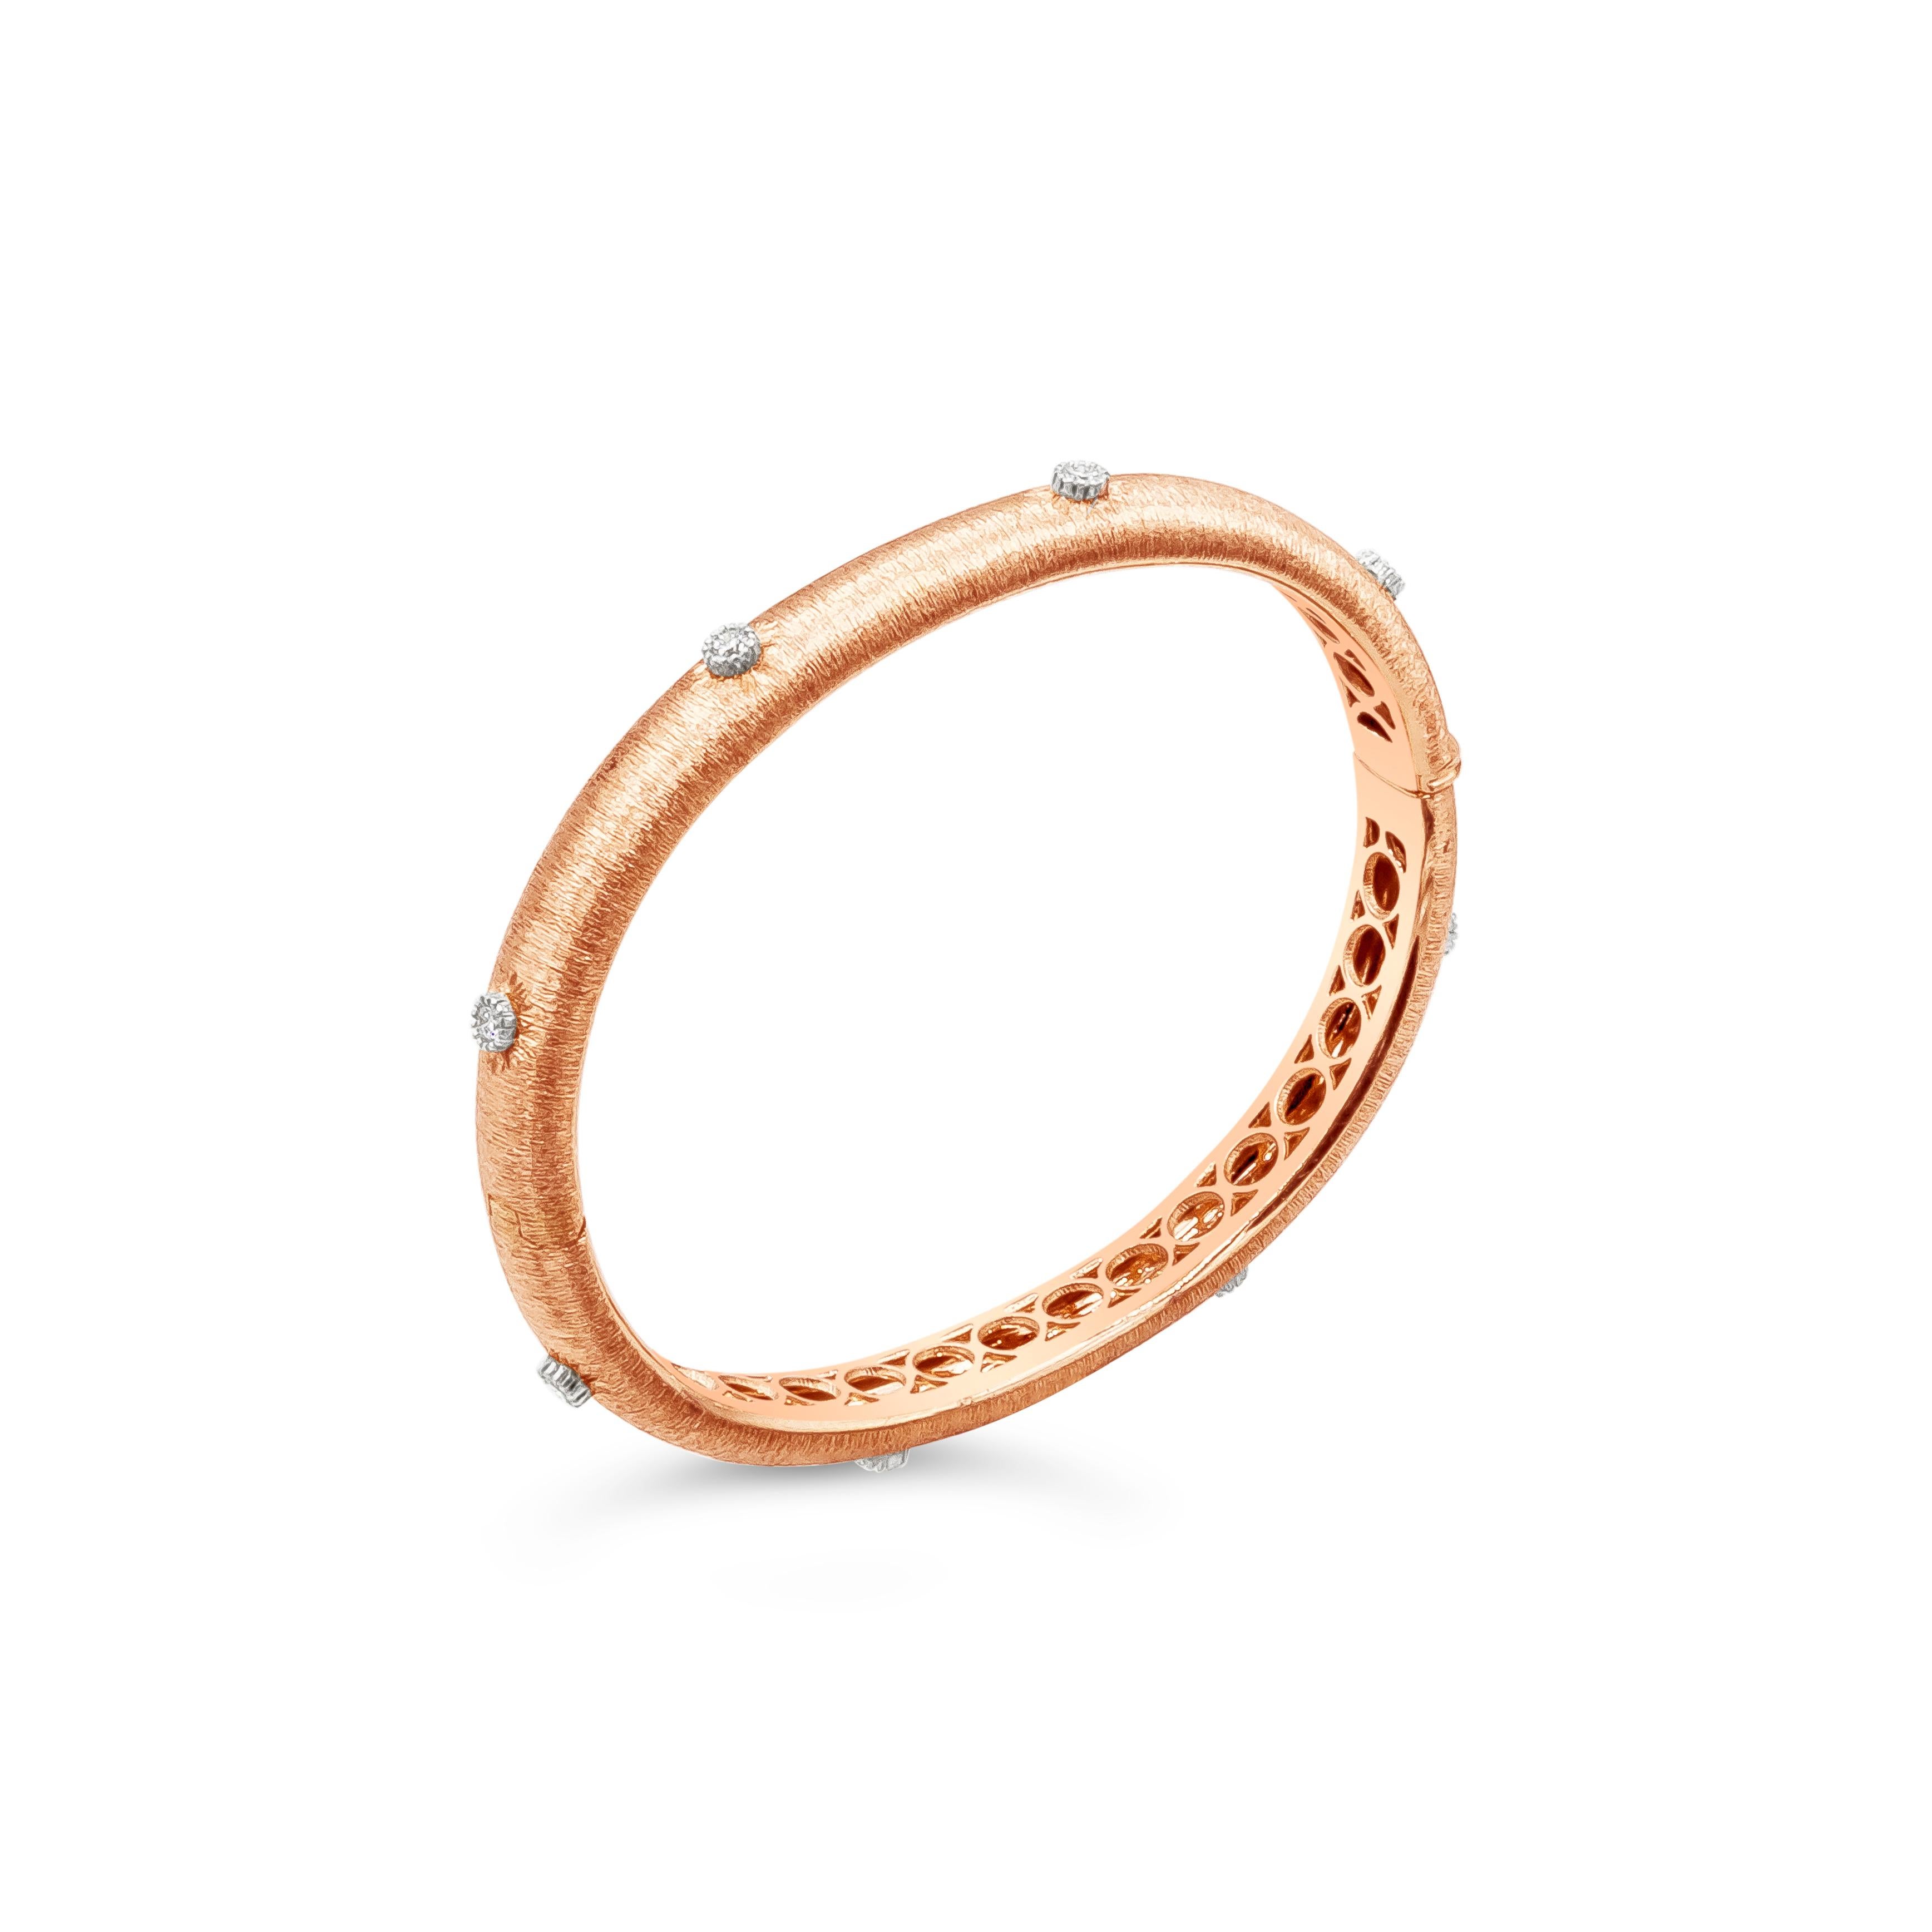 A fashionable bangle bracelet showcasing round brilliant diamonds weighing 0.45 carats total, set in a domed and brush finished bangle made in 18k rose gold.

